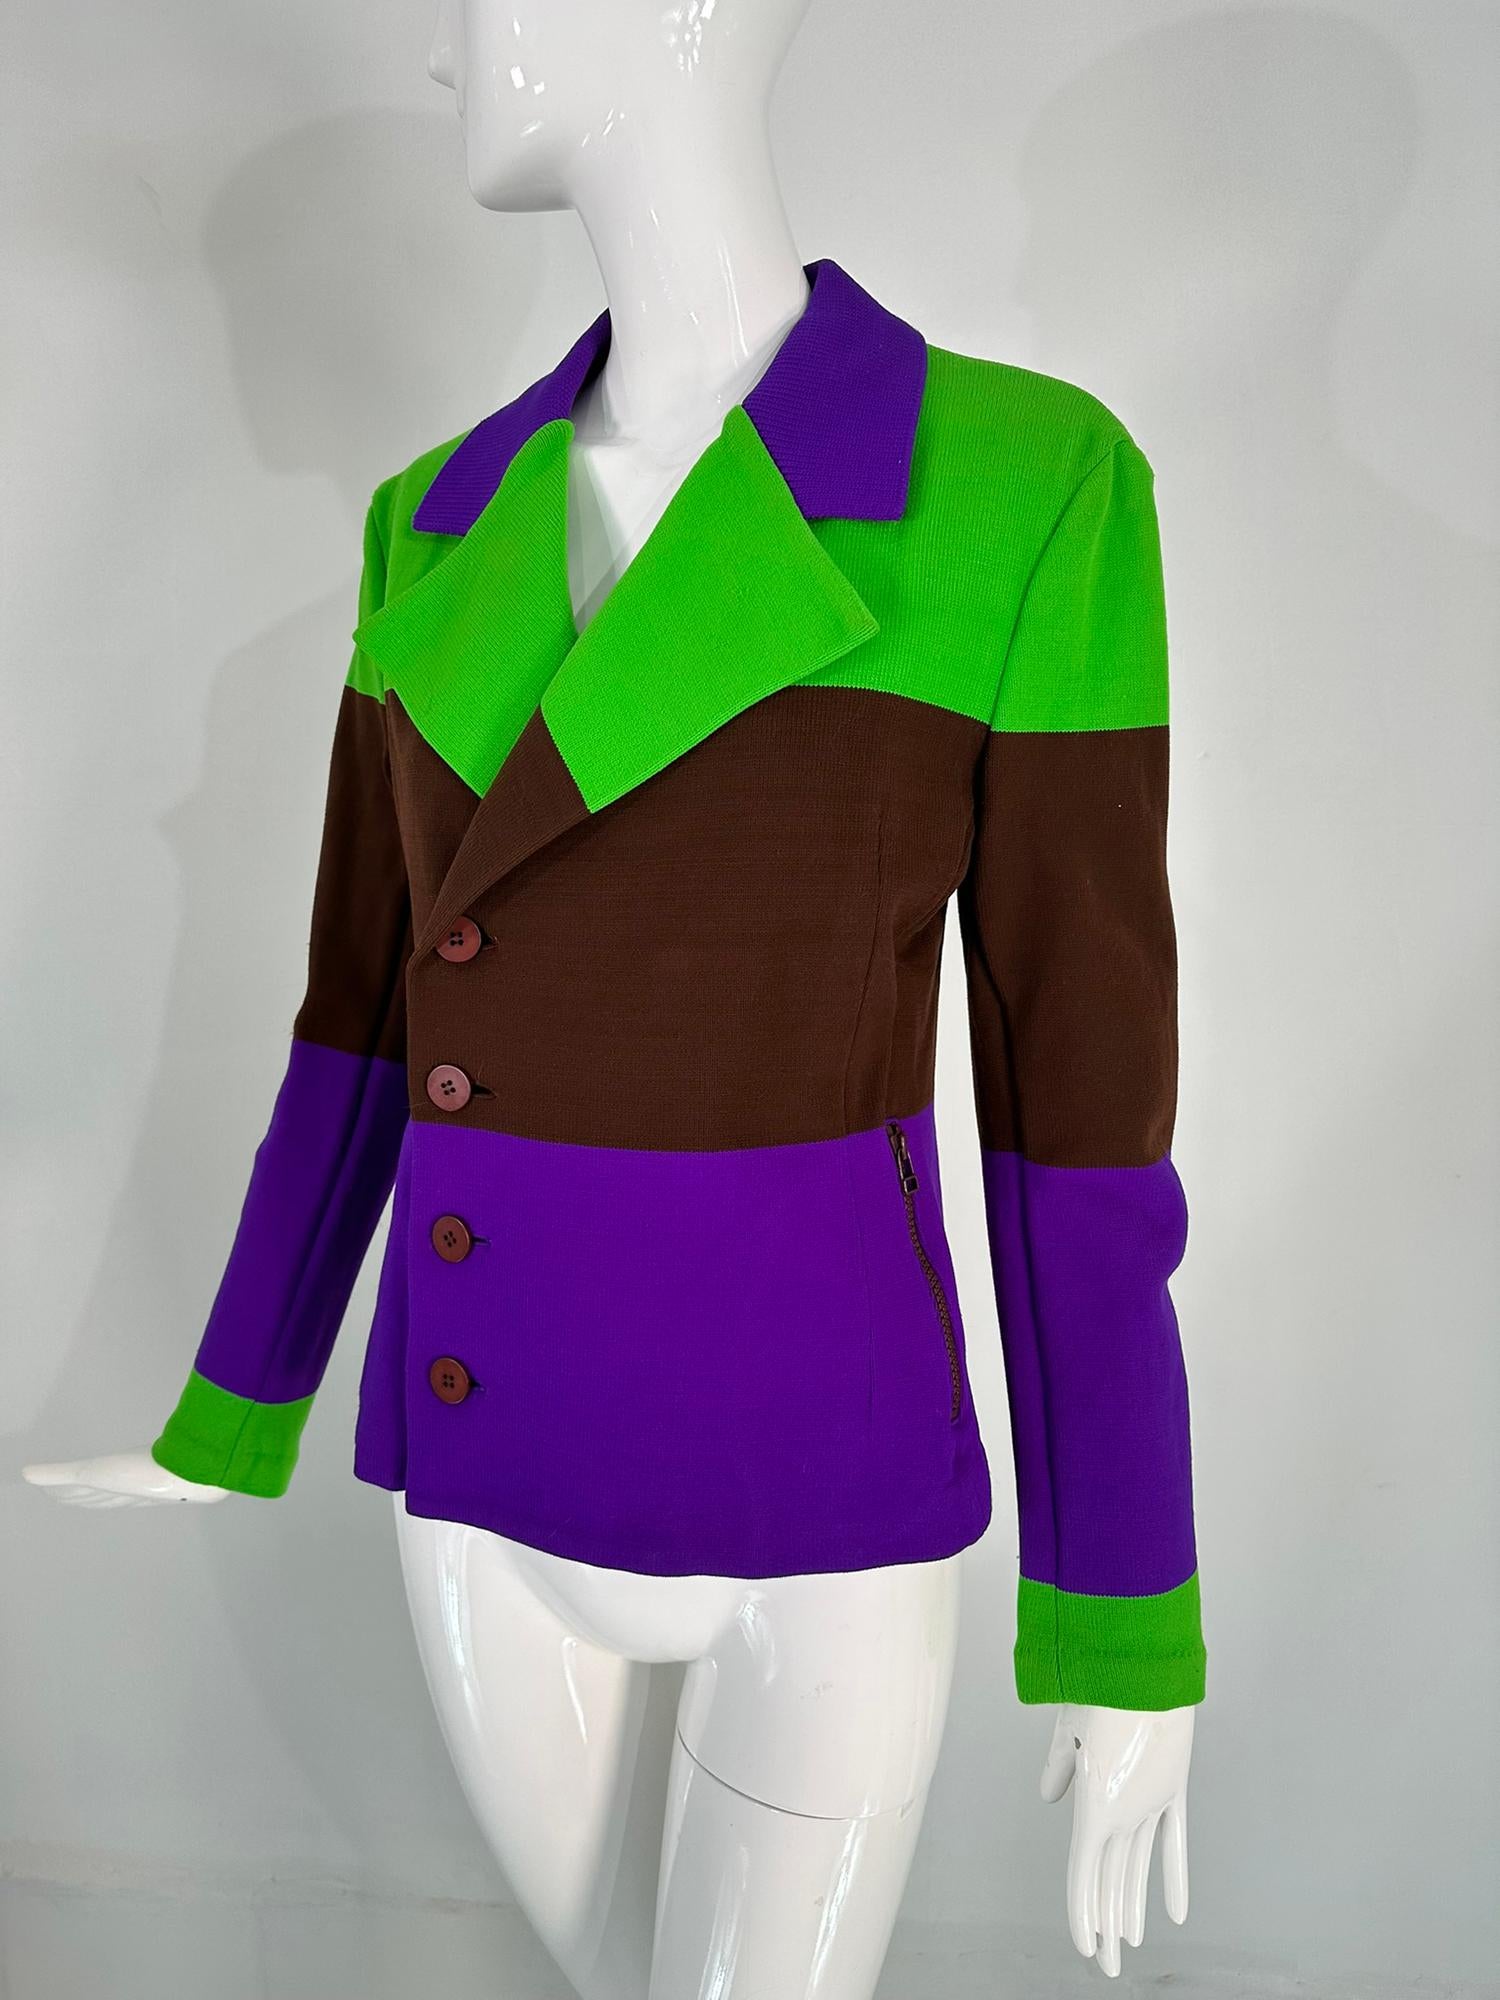 Issey Miyake Colour Block Nylon Knit Jacket in Acid Green Brown & Purple Small For Sale 6